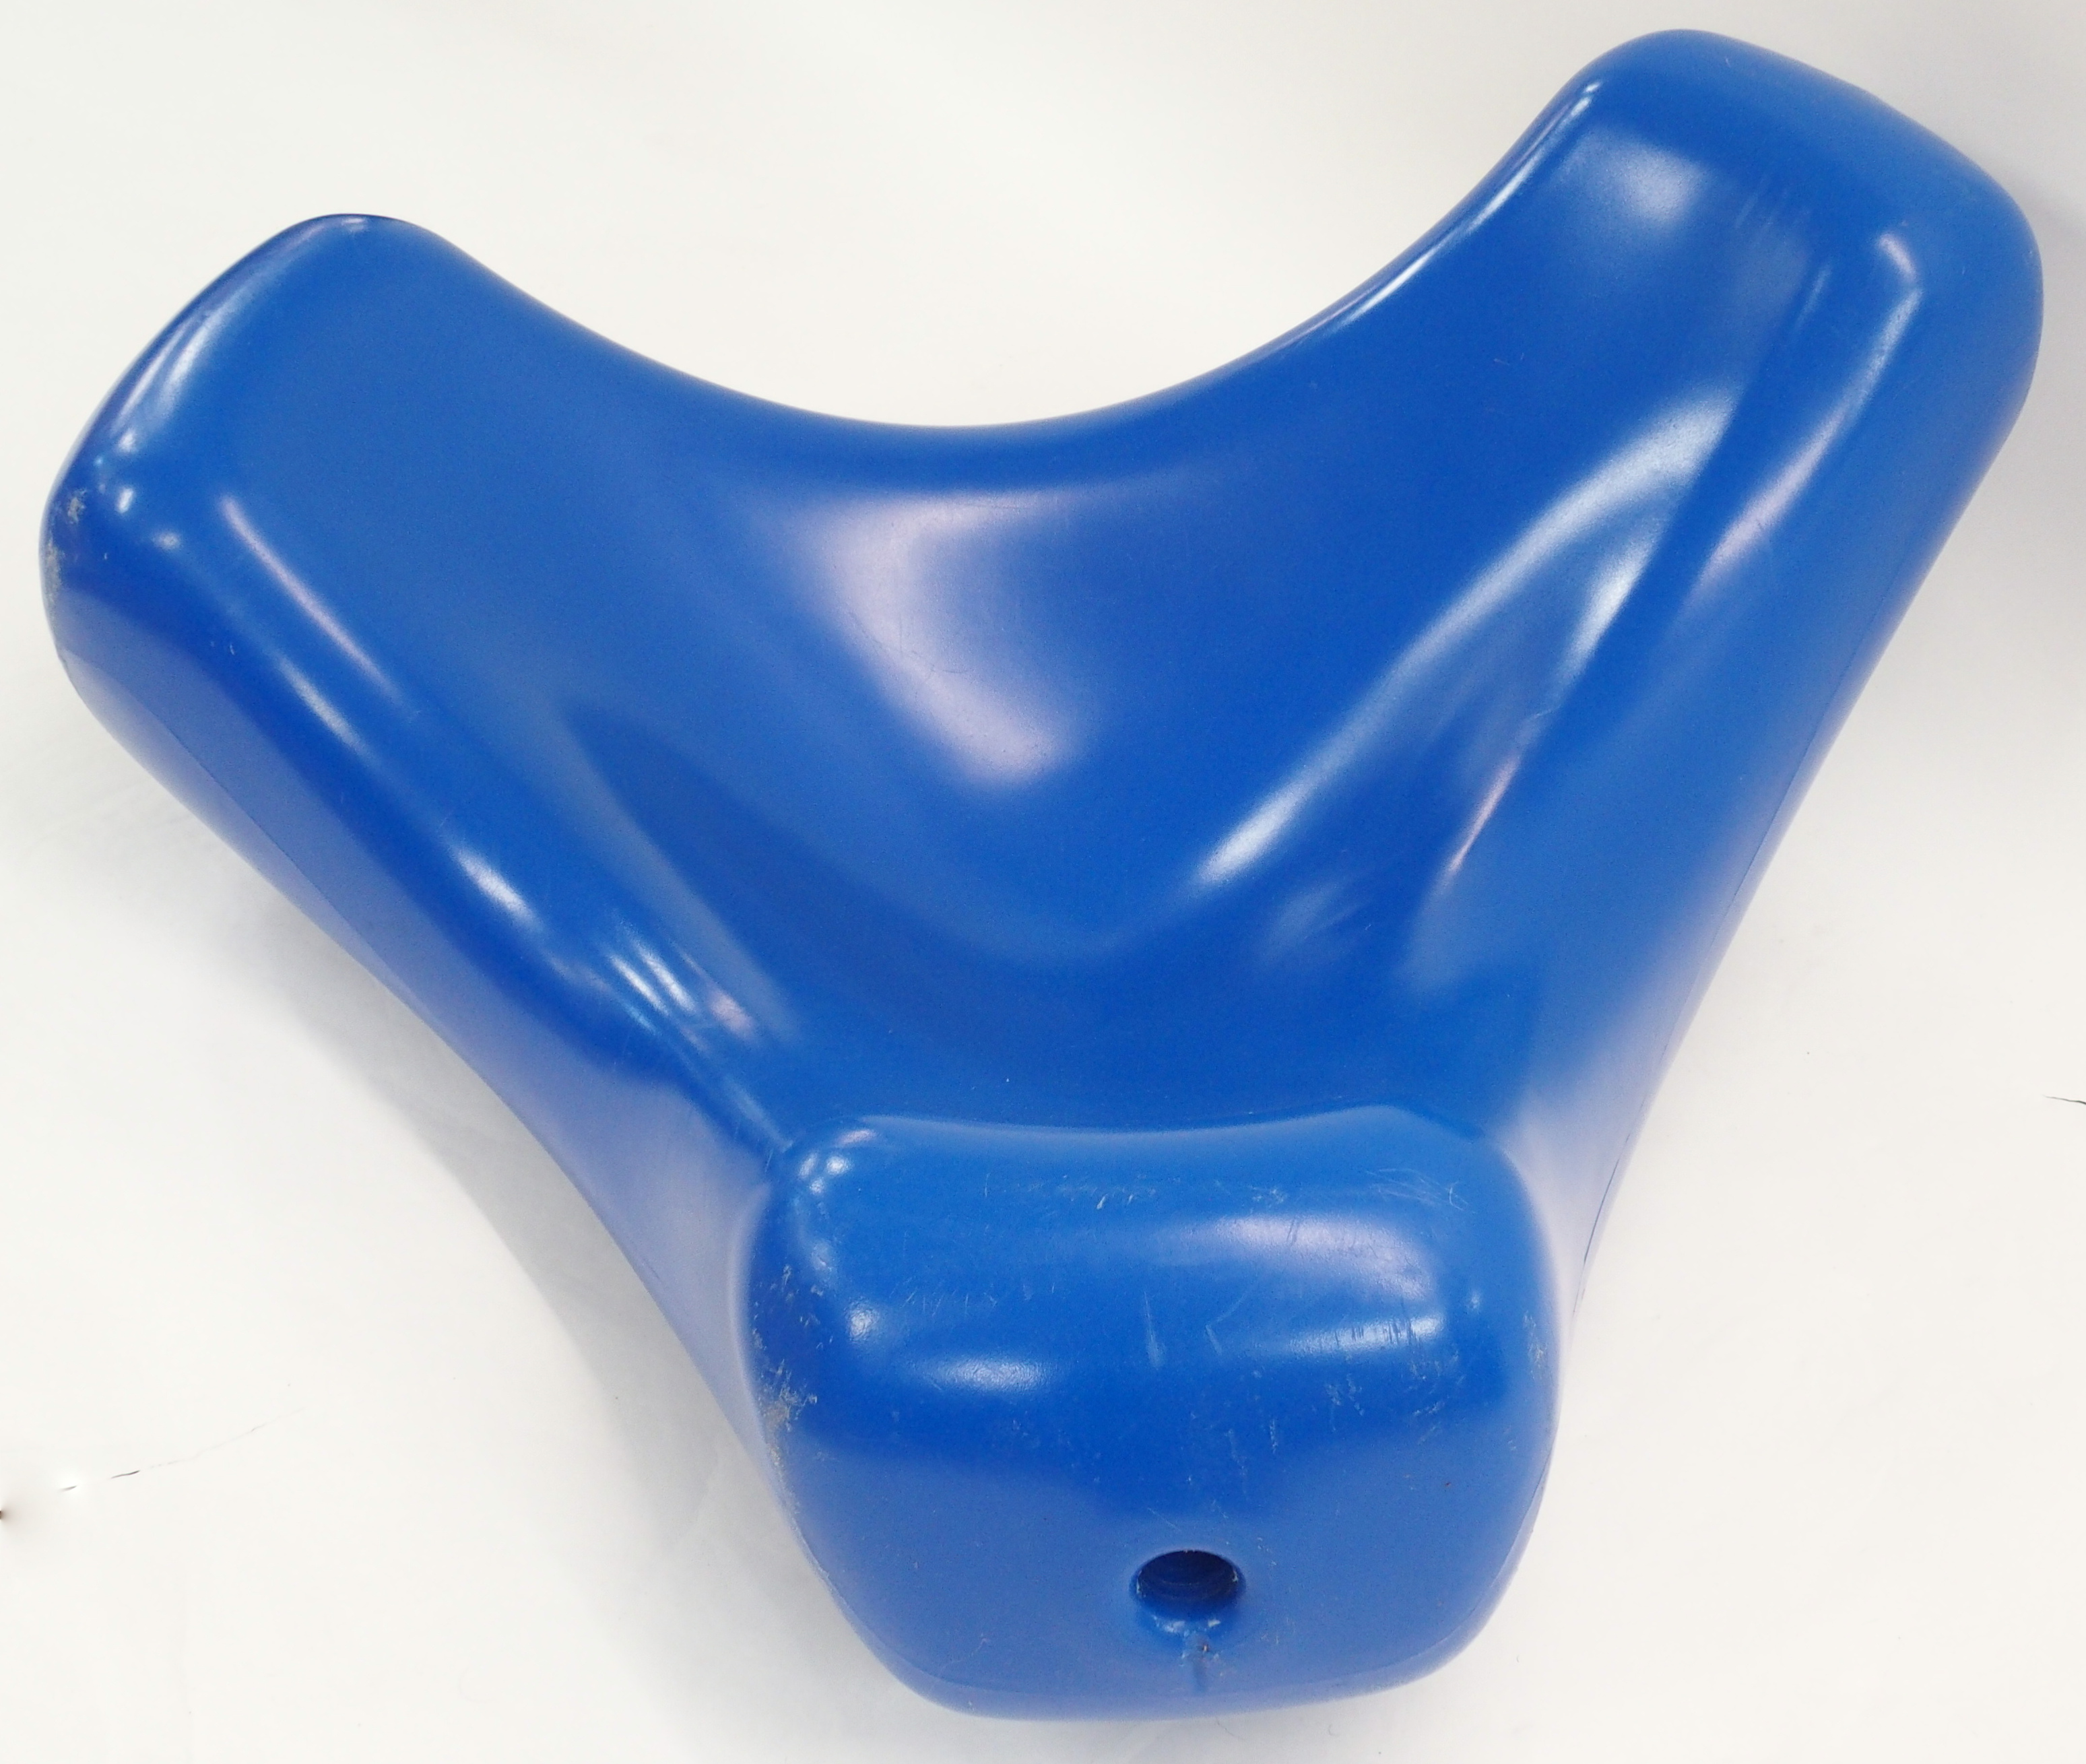 A MARC NESON BLUE "BUCKY" CHAIR II EDITION 97cm wide, the moulded plastic chair was designed for the - Image 2 of 10